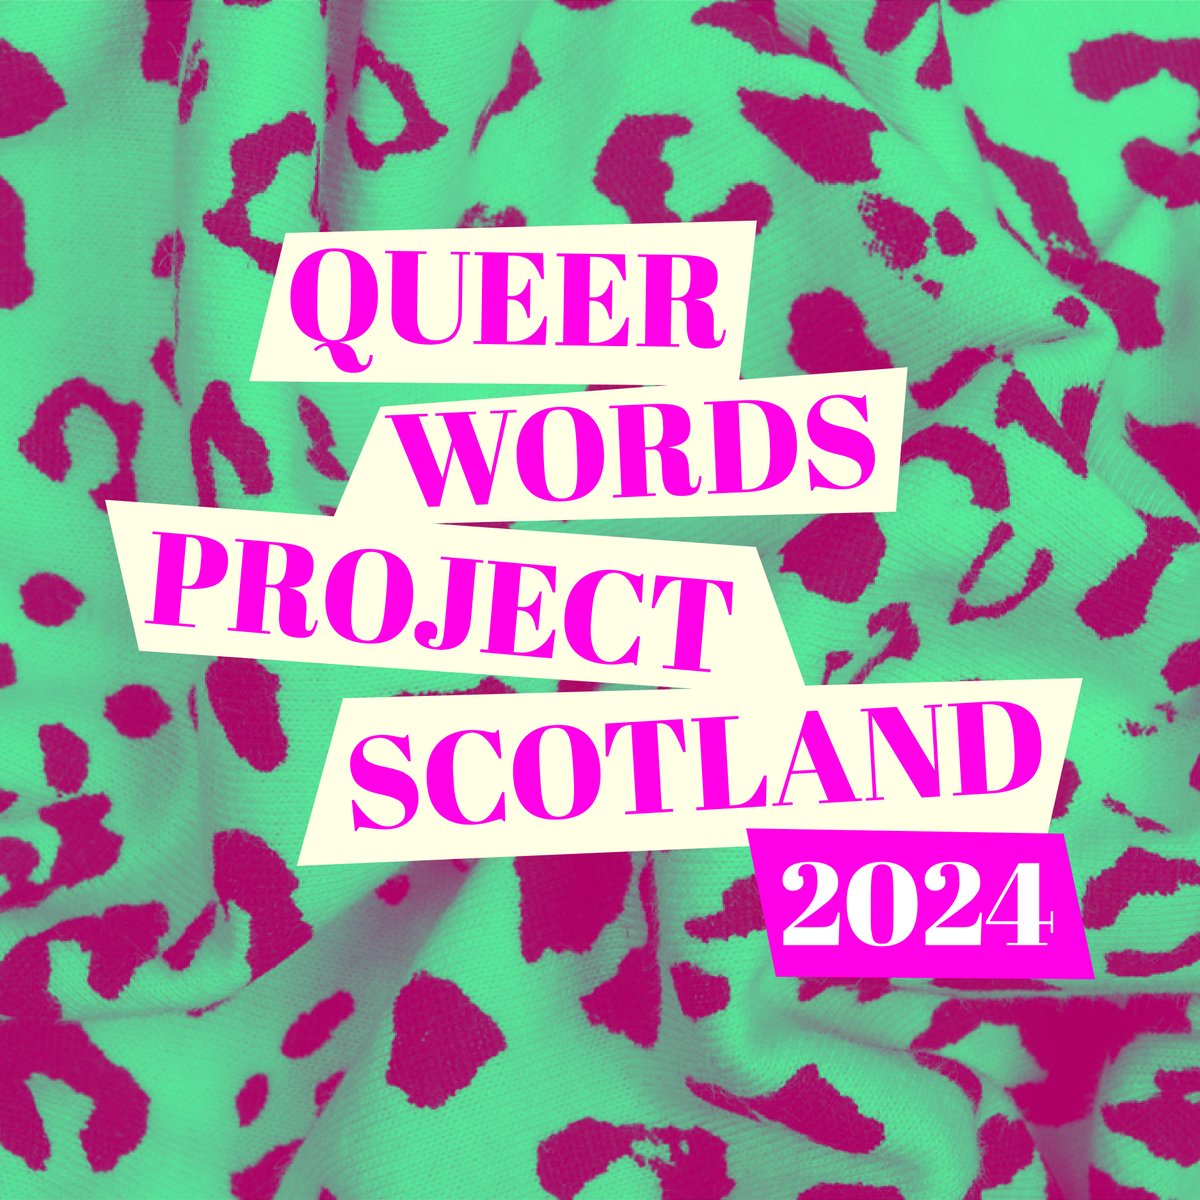 You have ONE WEEKEND REMAINING to submit work to Fierce Salvage, the follow-up to We Were Always Here. No themes, no genre expectations, just unbridled queer fiction, poetry and memoir. We are on TENTERHOOKS to start putting it together - don't miss out! queerwordsprojectscotland.com